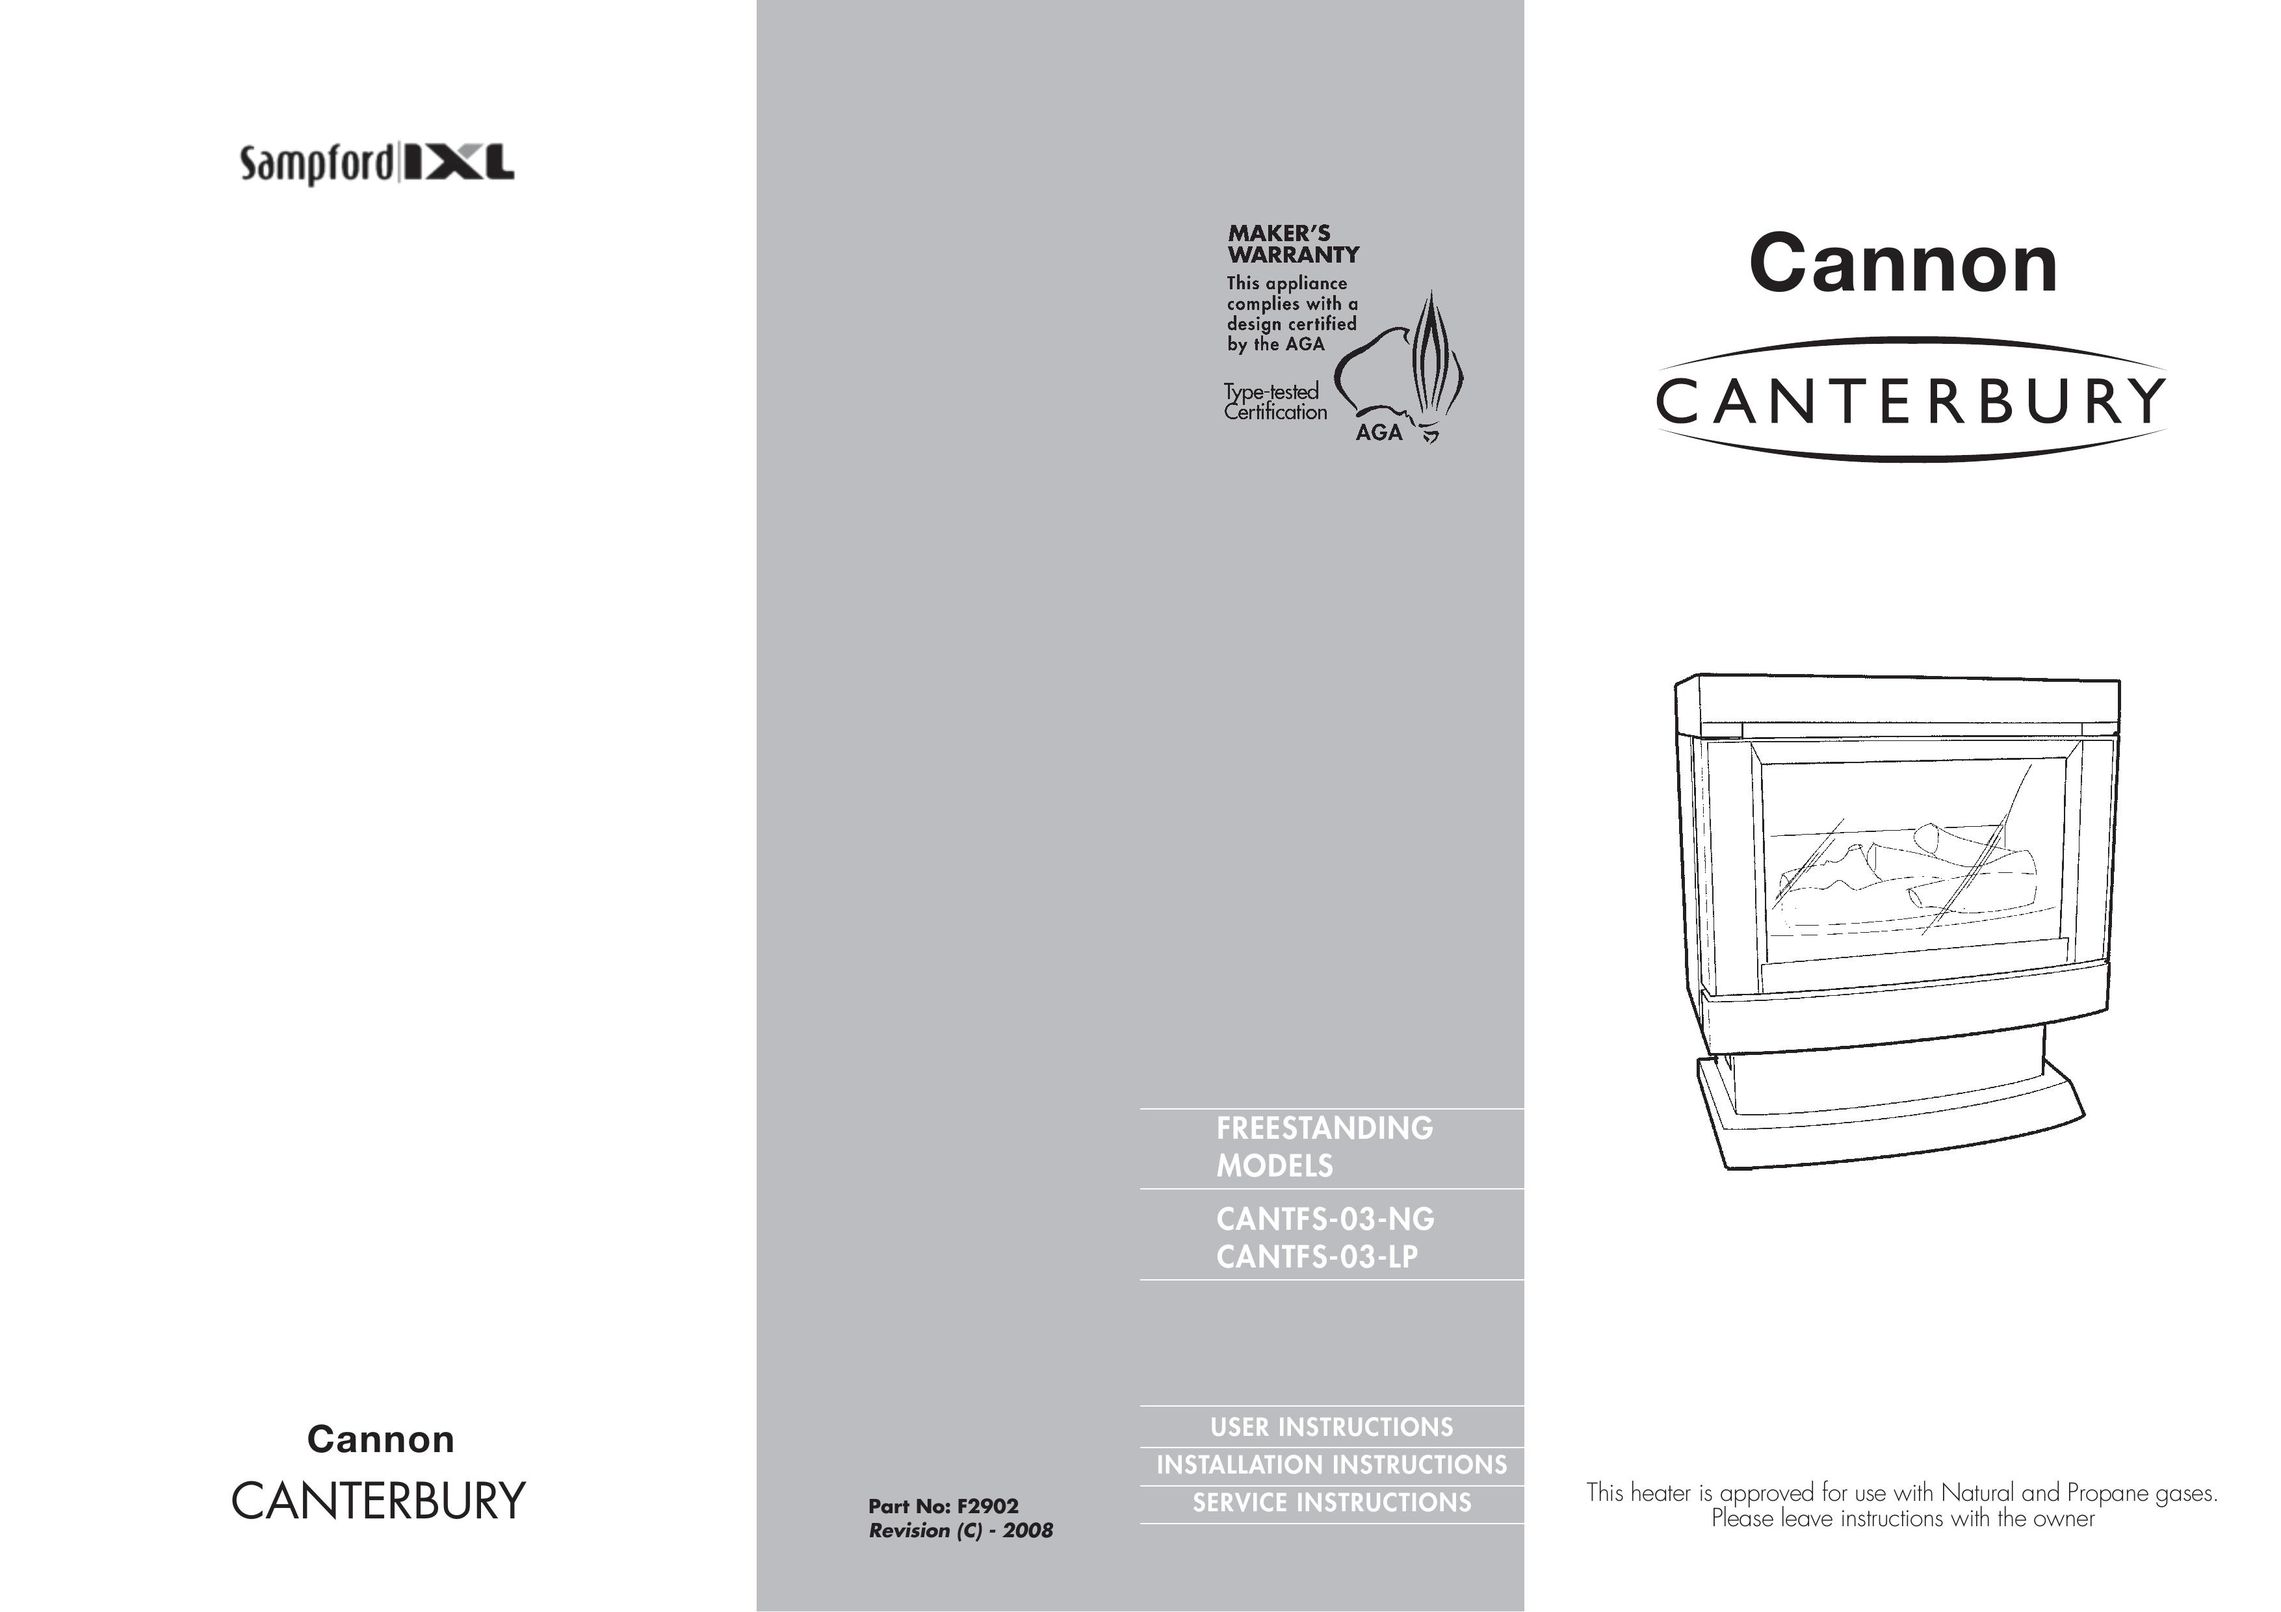 Cannon CANTFS-03-LP Gas Heater User Manual